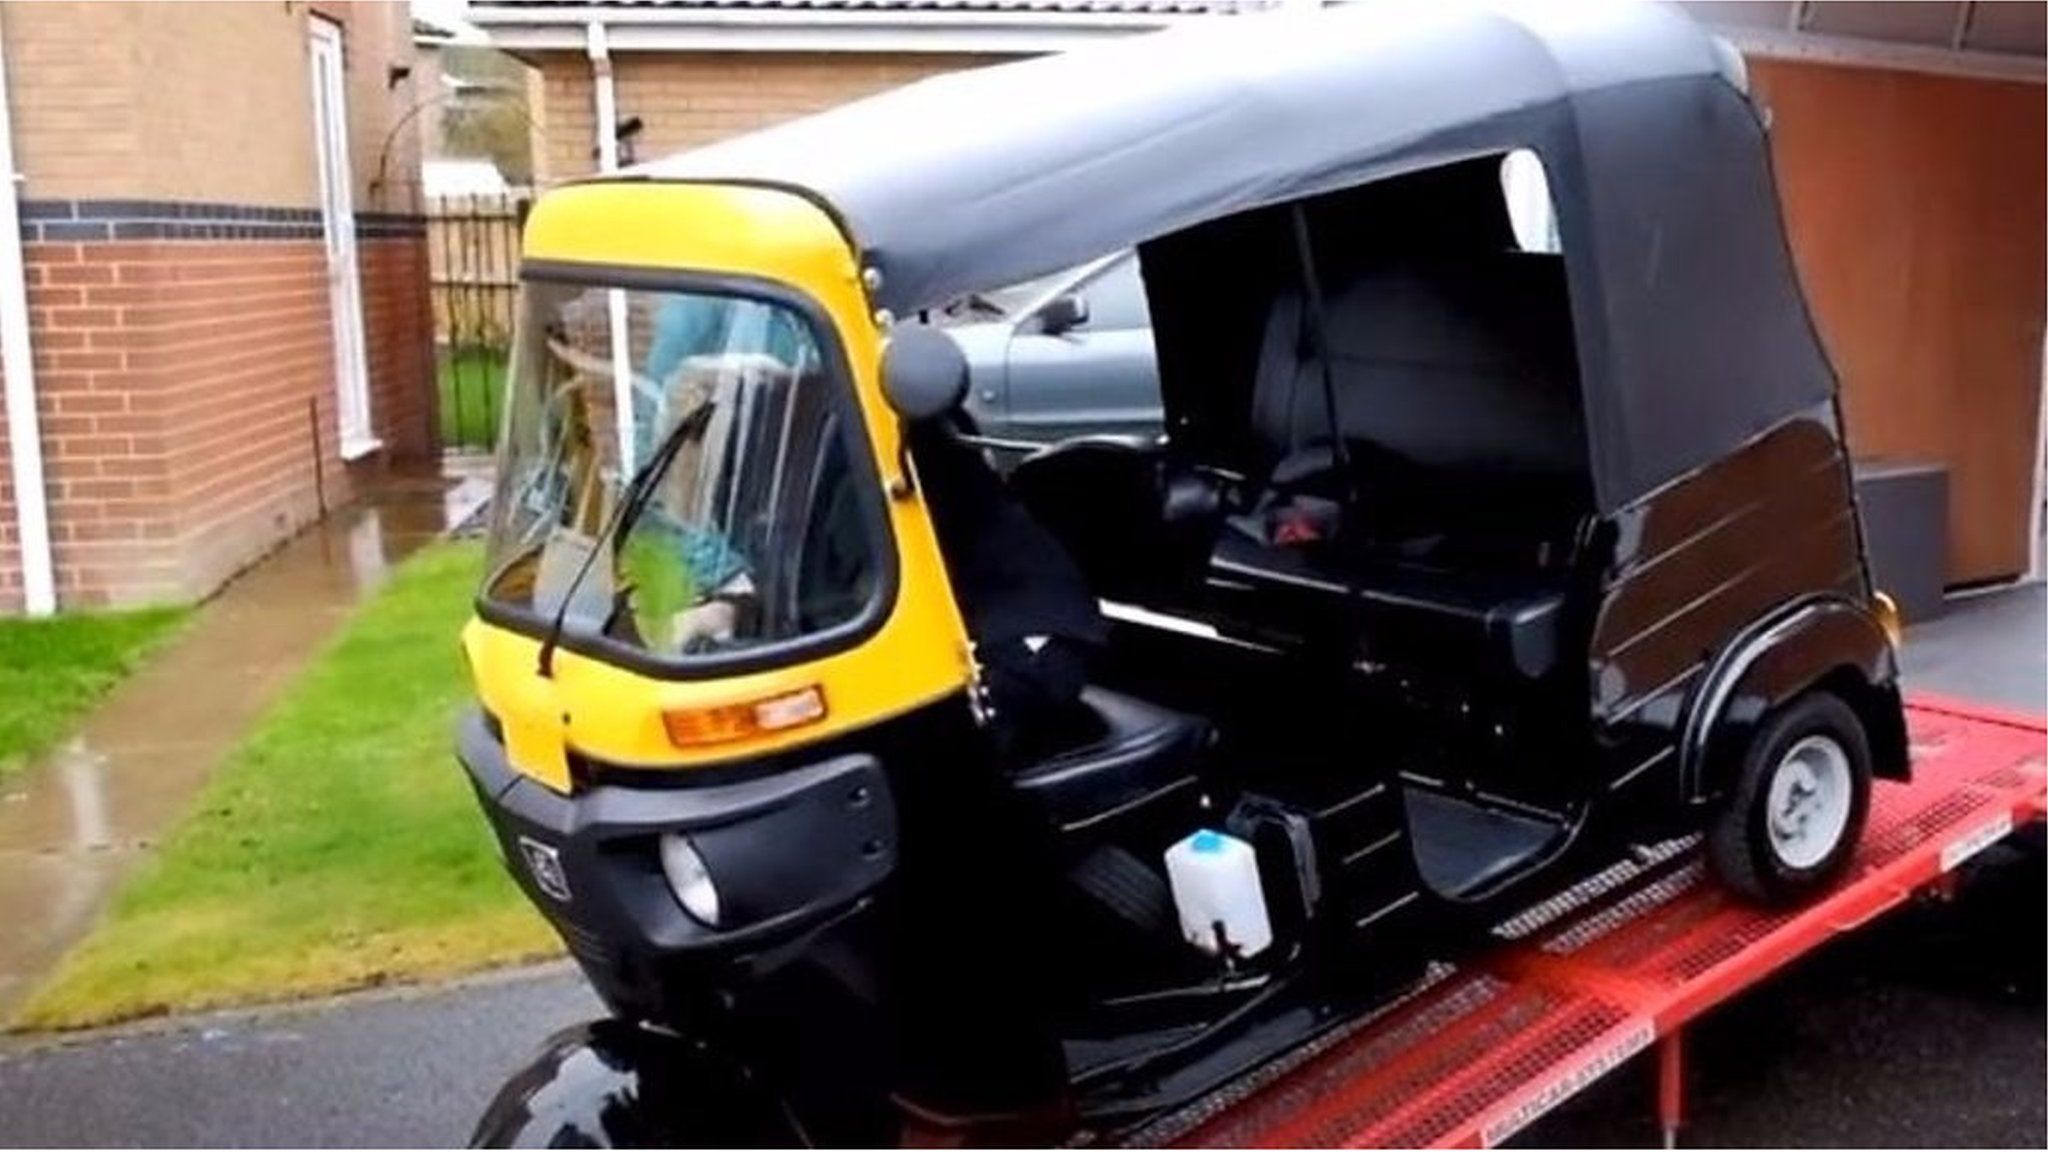 Callam Fairhurst from Soham is about to visit all 28 European Union countries in a tuk-tuk.